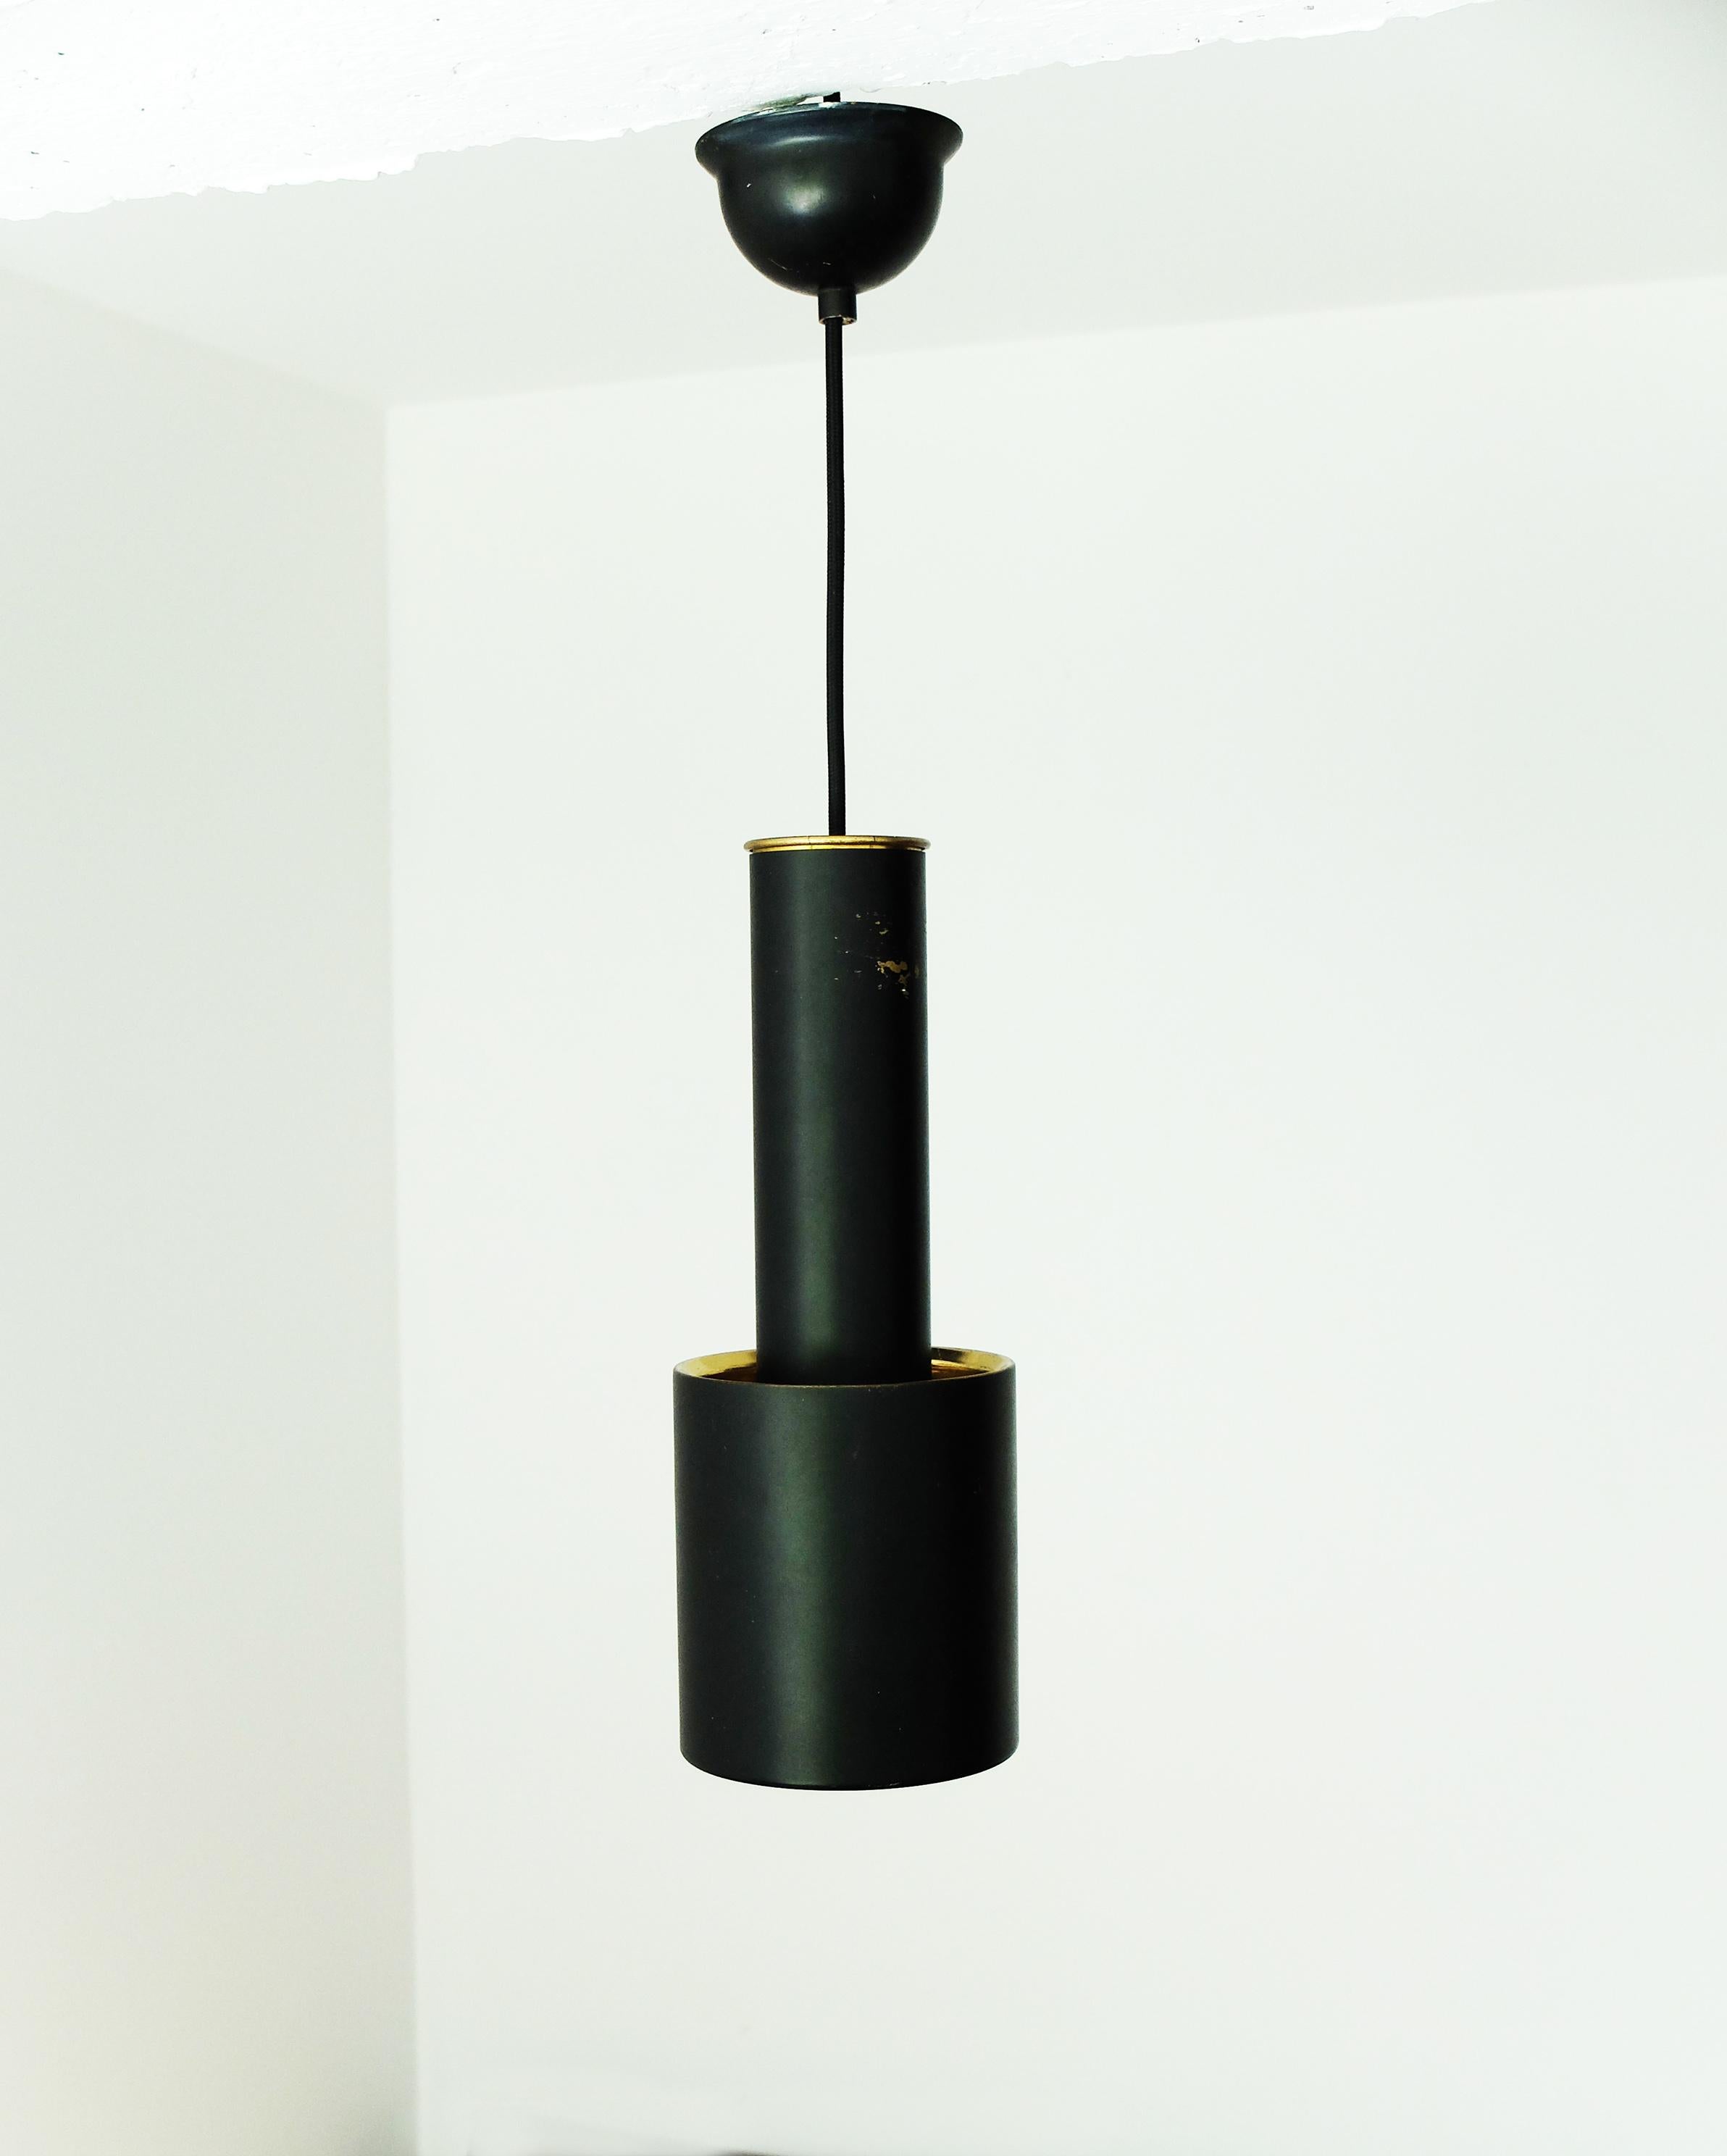 This elegant pendant light is nicknamed “Hand Grenade” because of its distinctive shape. 

This vintage lamp has been produced by Louis Poulsen, Denmark in the 1950s or 1960s.

The pendant Light A110 provides an exceptional warm-toned light due